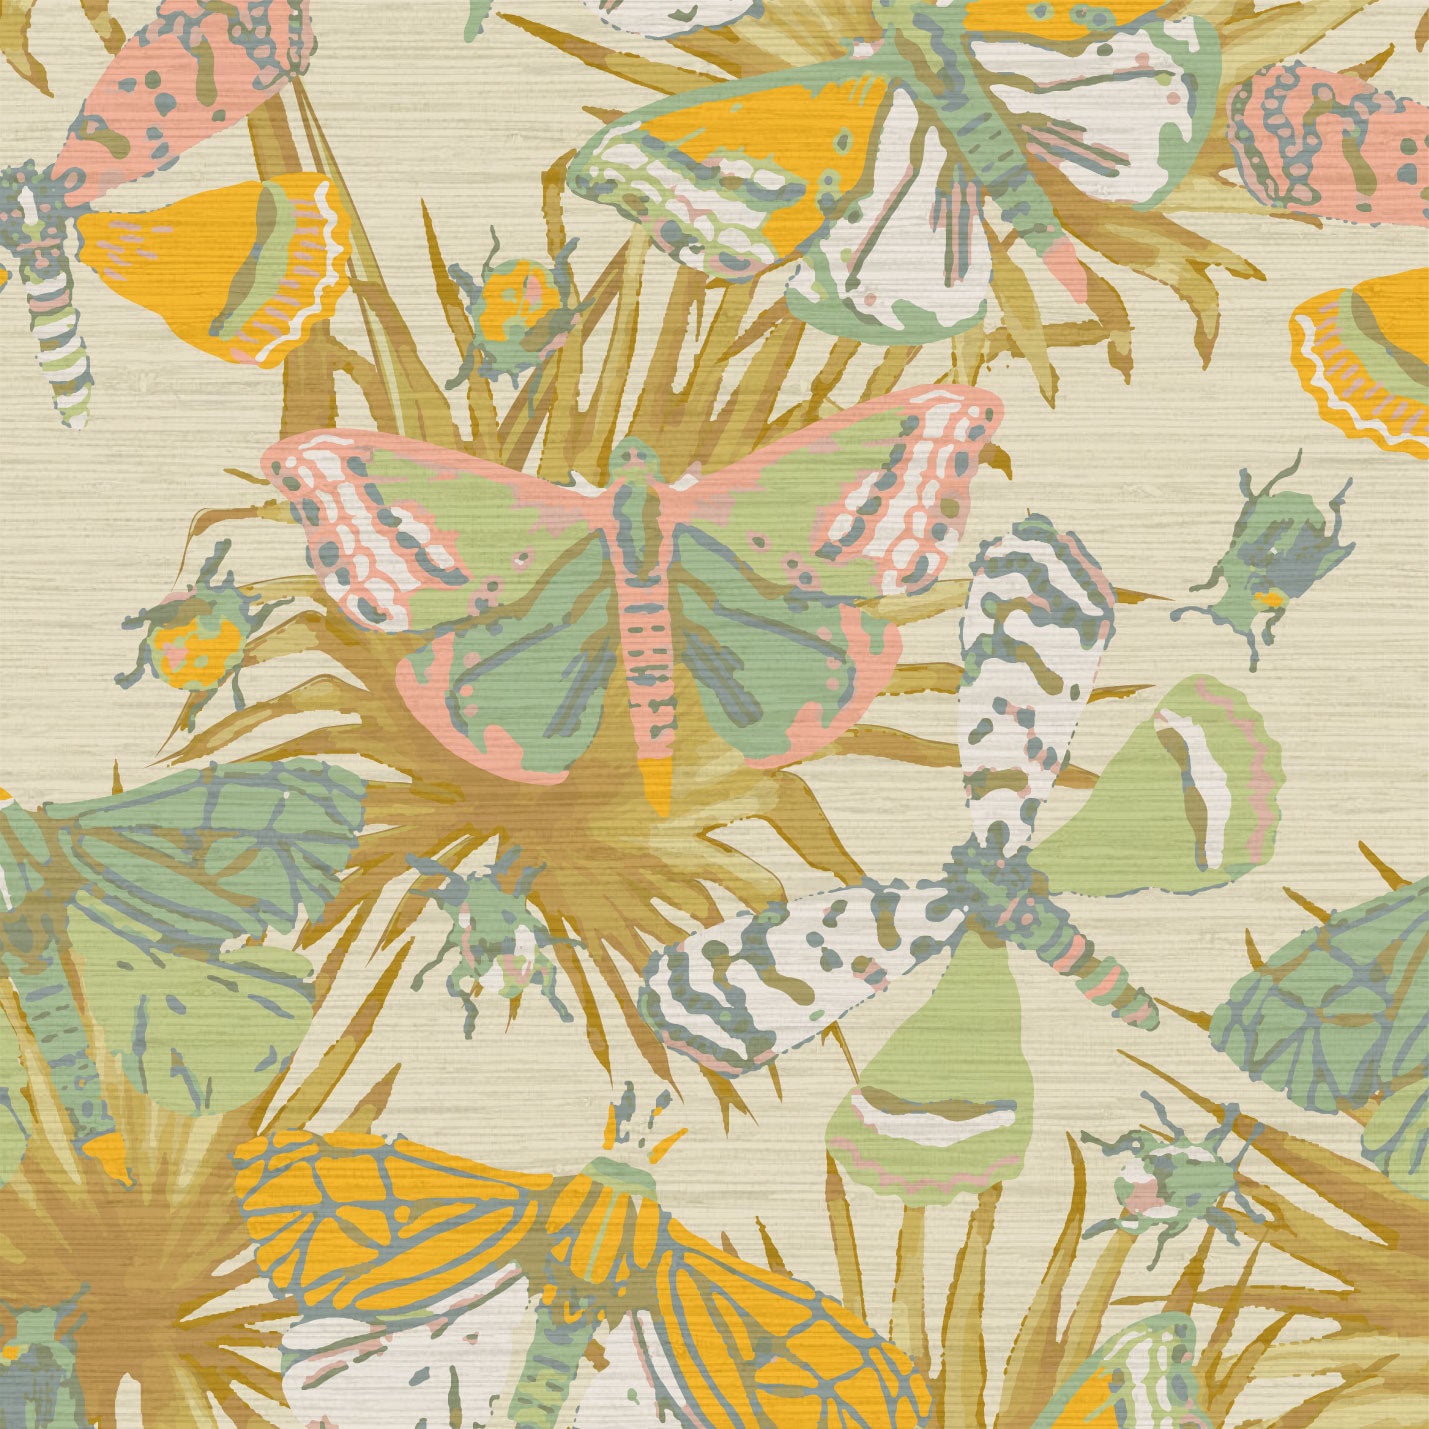 grasscloth printed wallpaper with cream base and subtle olive, tan and brown palm leafs as base print with oversized multi colored butterflies layered on top. Butterflies and bugs are designed using a range of pastel pinks, light olive, dusty blue, gold and off white.